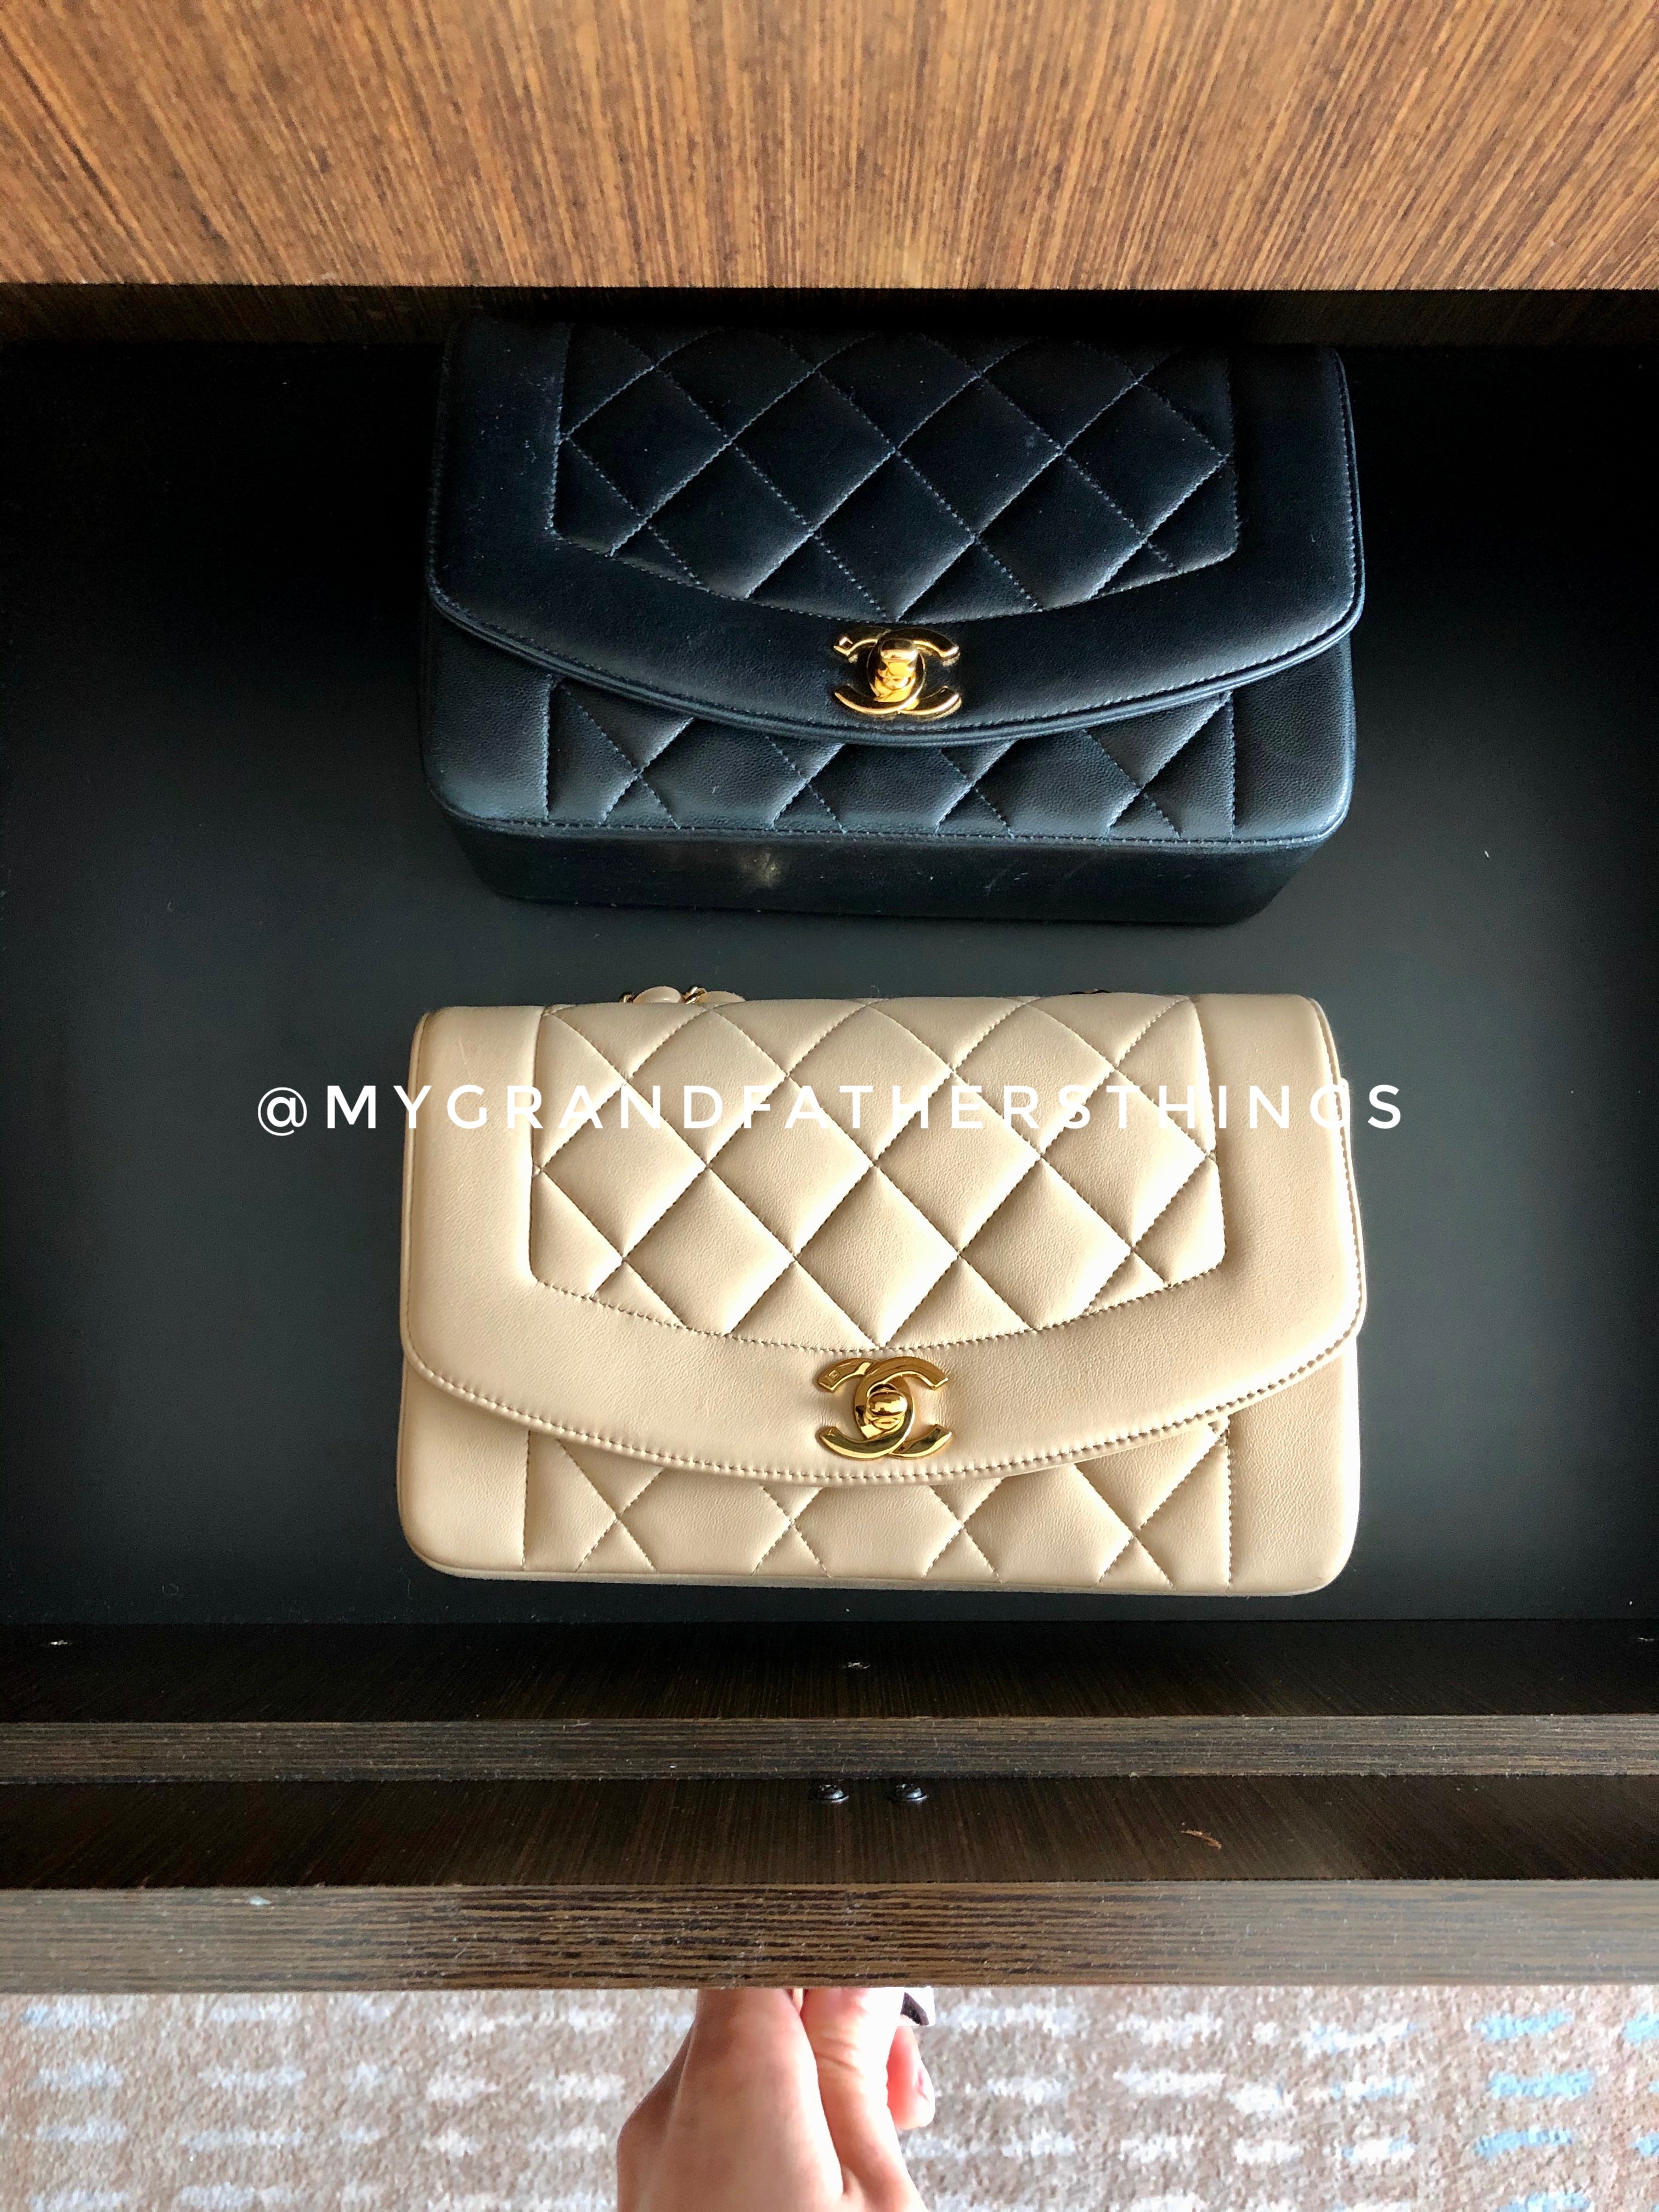 How to Store Chanel Handbags - Lollipuff